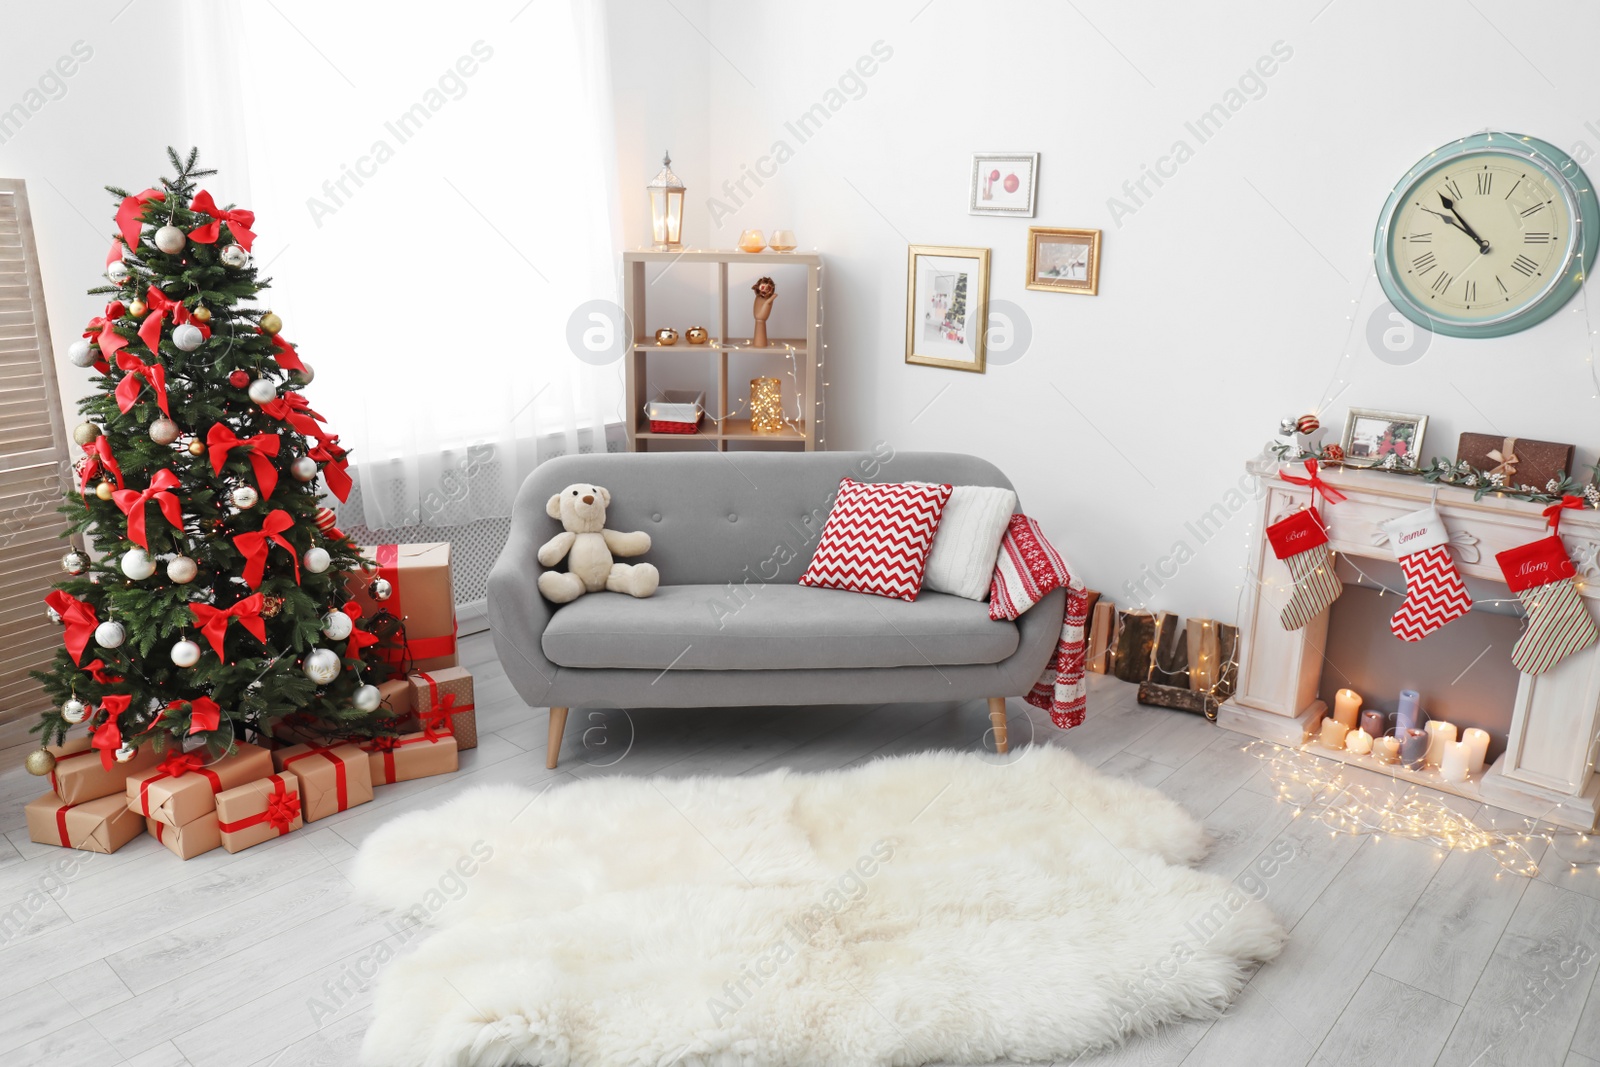 Photo of Living room interior with decorated Christmas tree